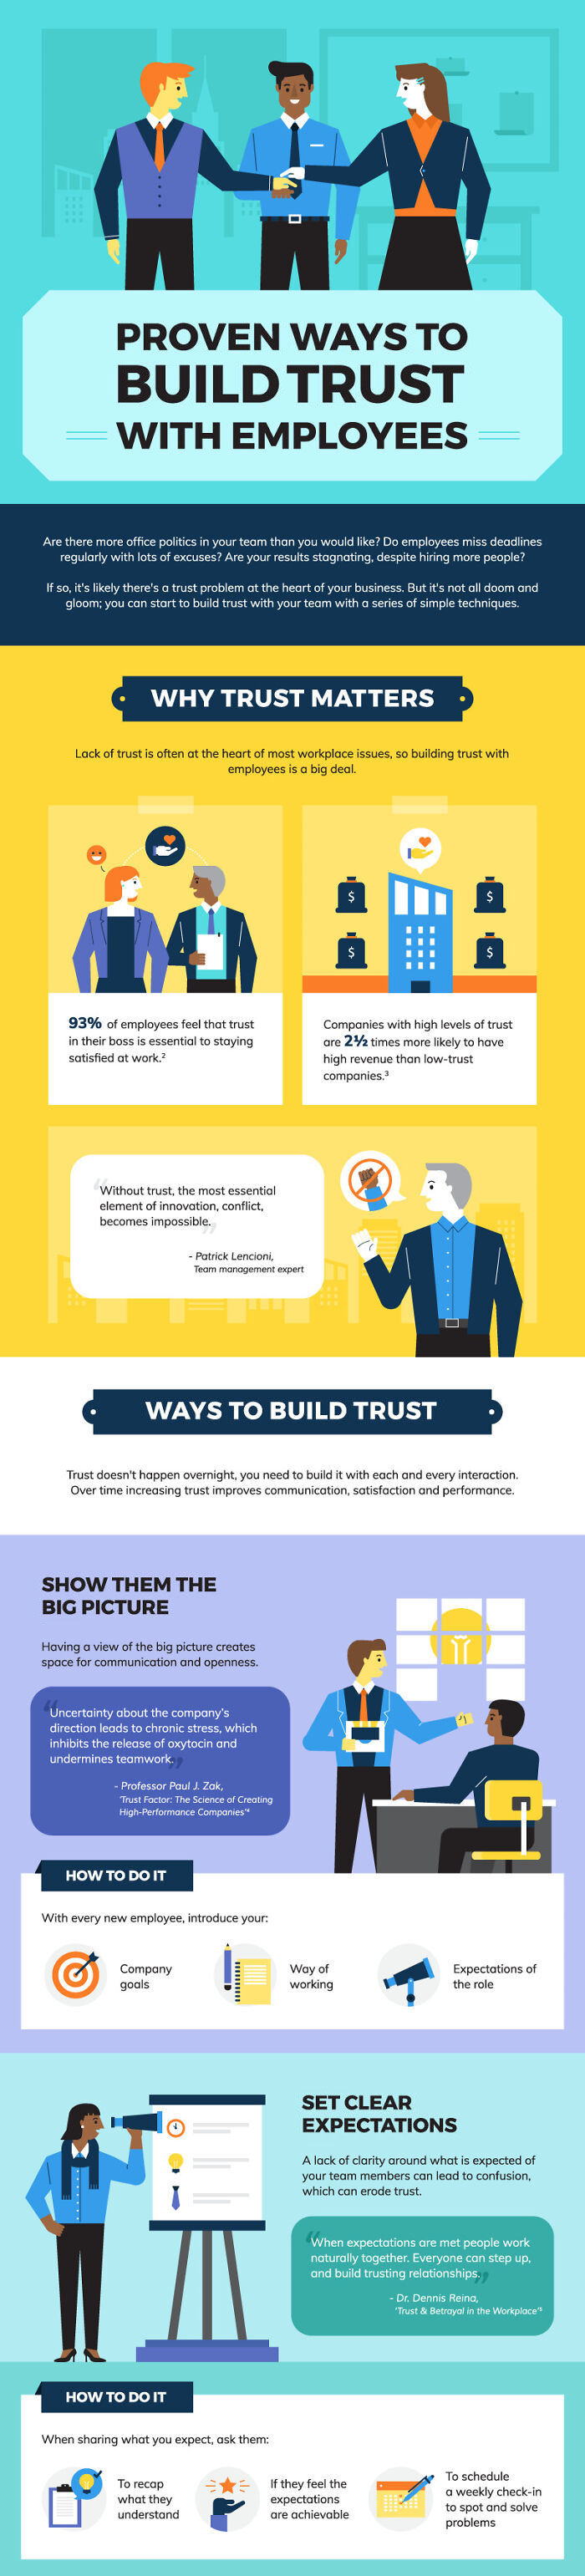 Guide Showing How To Build Trust With 'Employees' (But Works With Everyone)